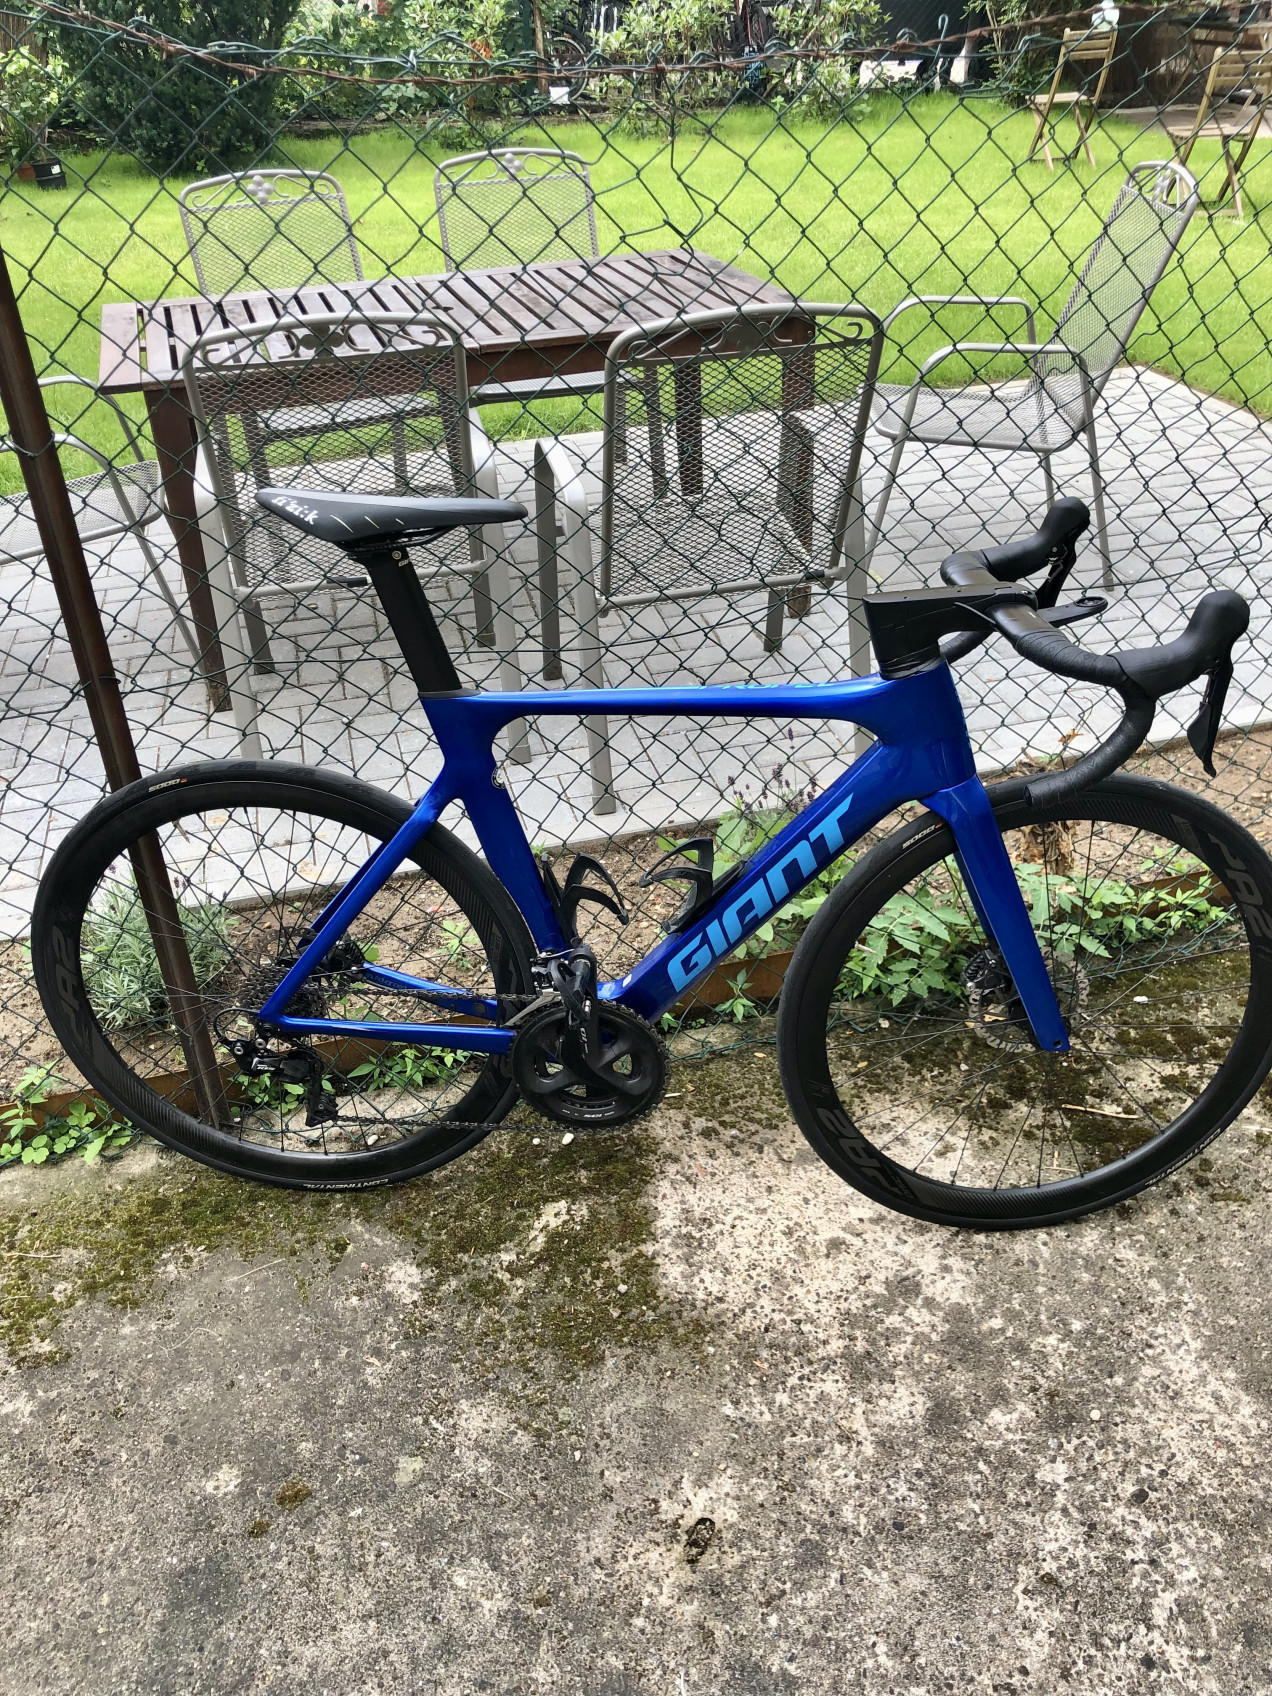 Giant Propel Advanced 2 Disc used in 52 cm | buycycle